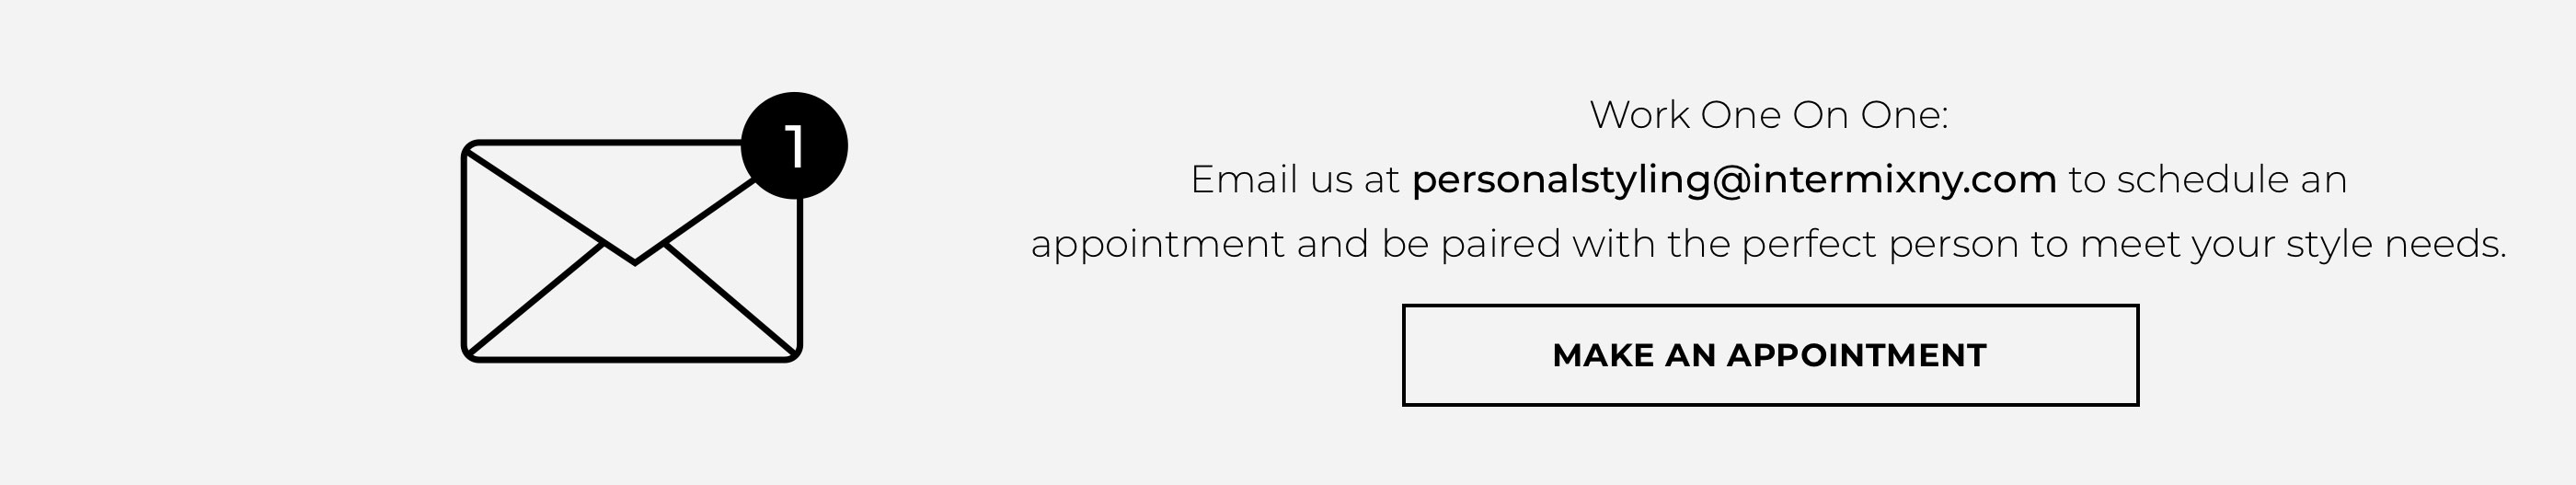 Email us to schedule an appointment and be paired with the perfect person to meet your style needs.